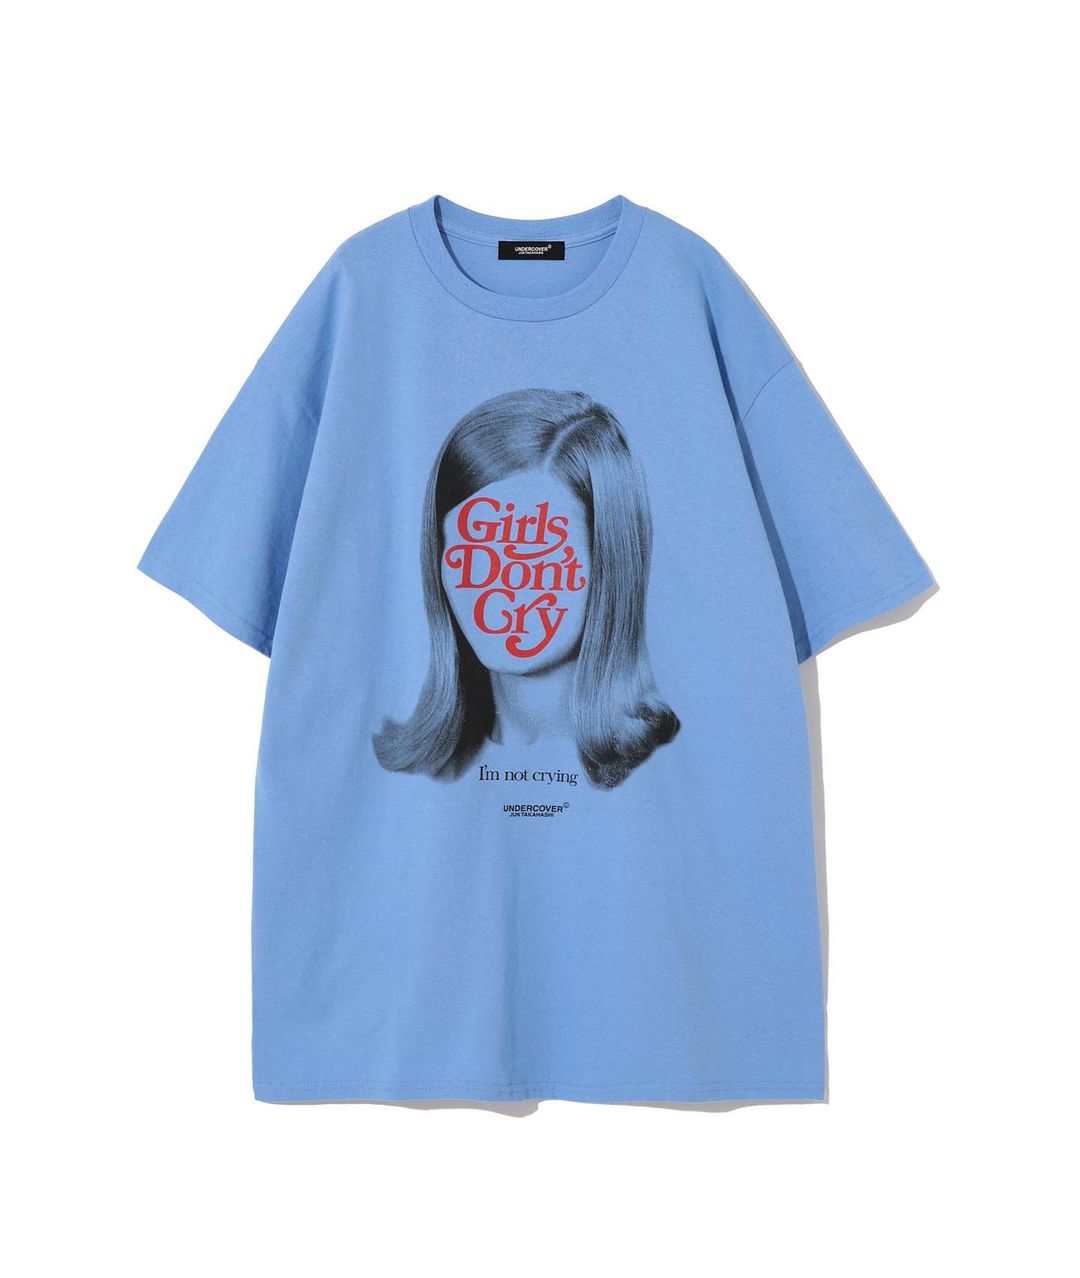 UNDERCOVER x Girls Don't Cry コラボアイテムがCOMPLEXCON 2022にて ...